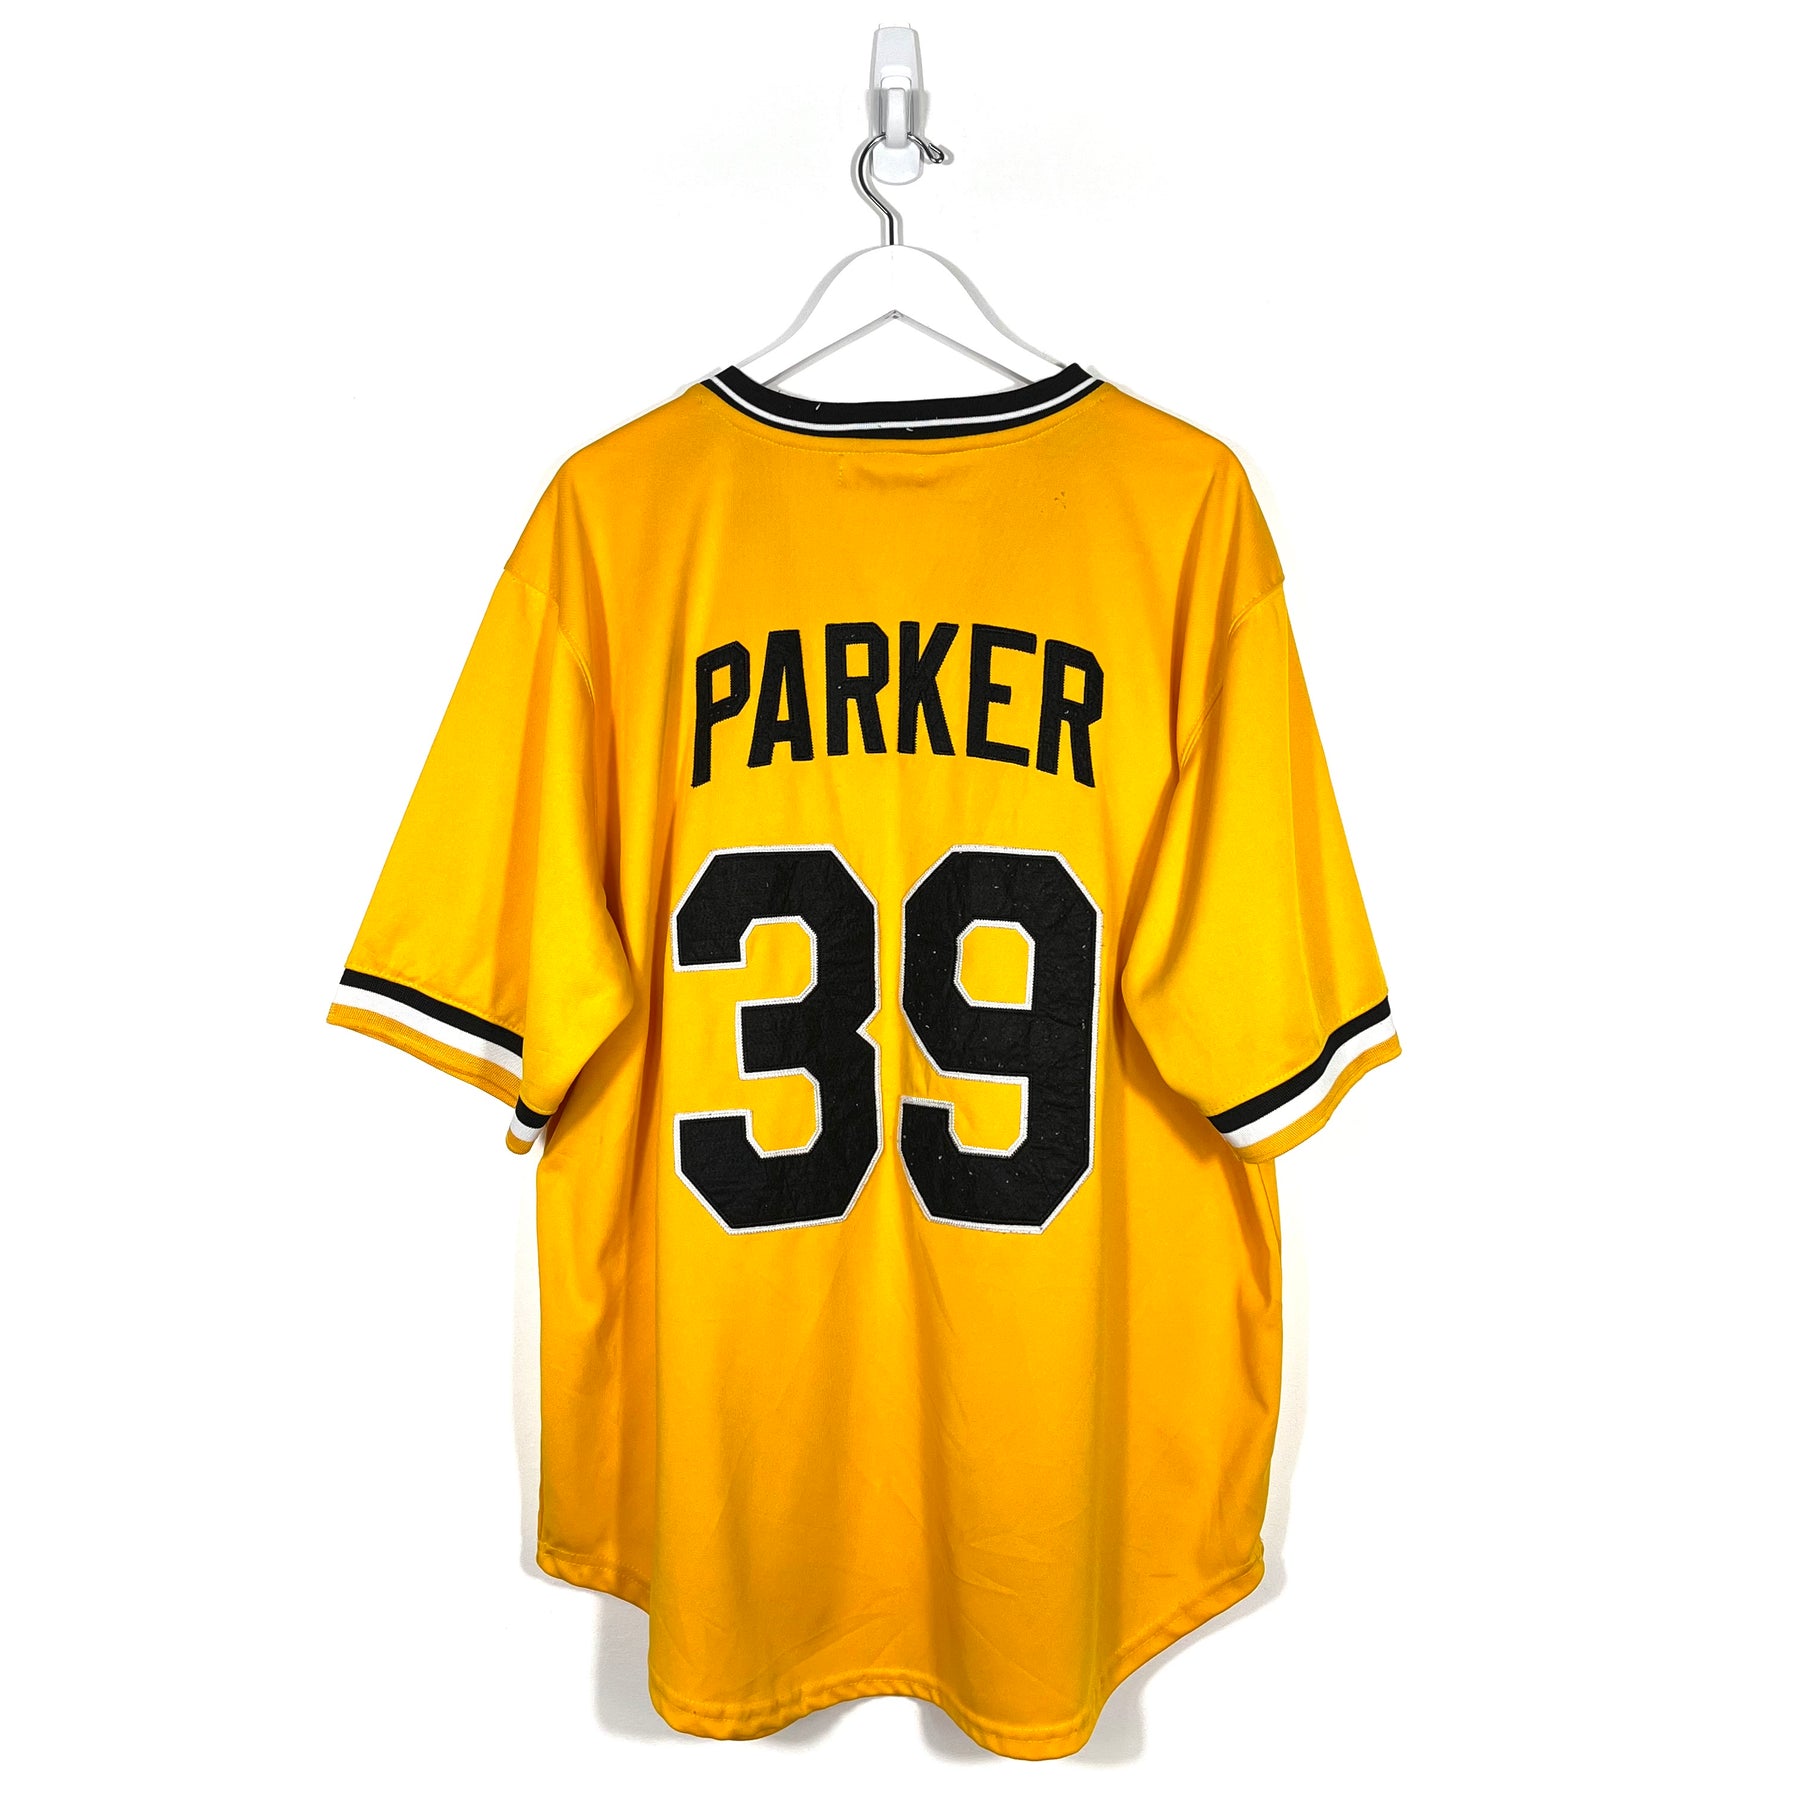 dave parker throwback jersey